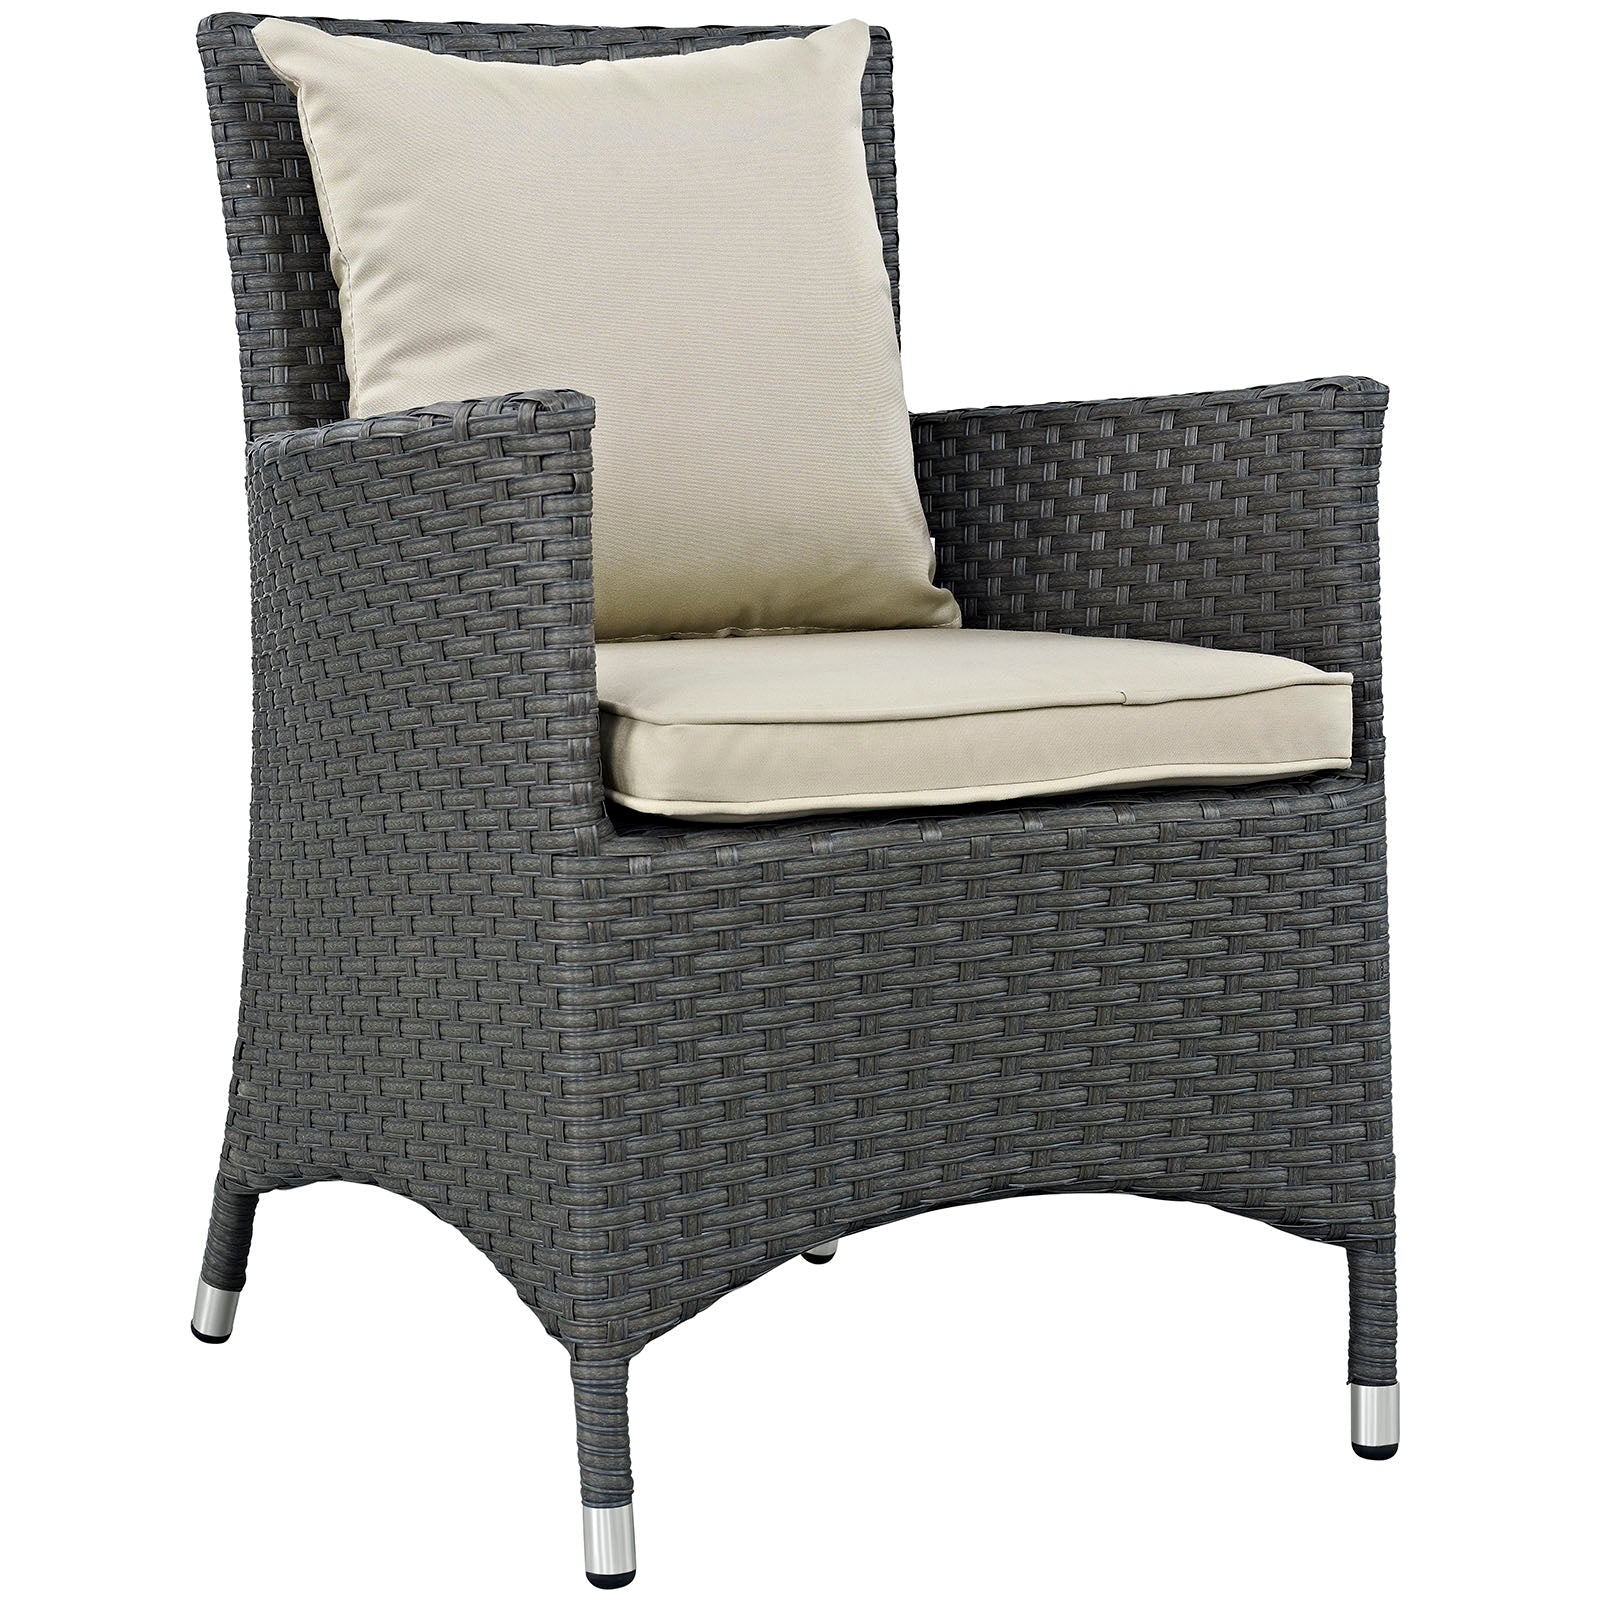 Modway Outdoor Dining Chairs - Sojourn Dining Outdoor Patio Sunbrella Armchair Antique Canvas Beige